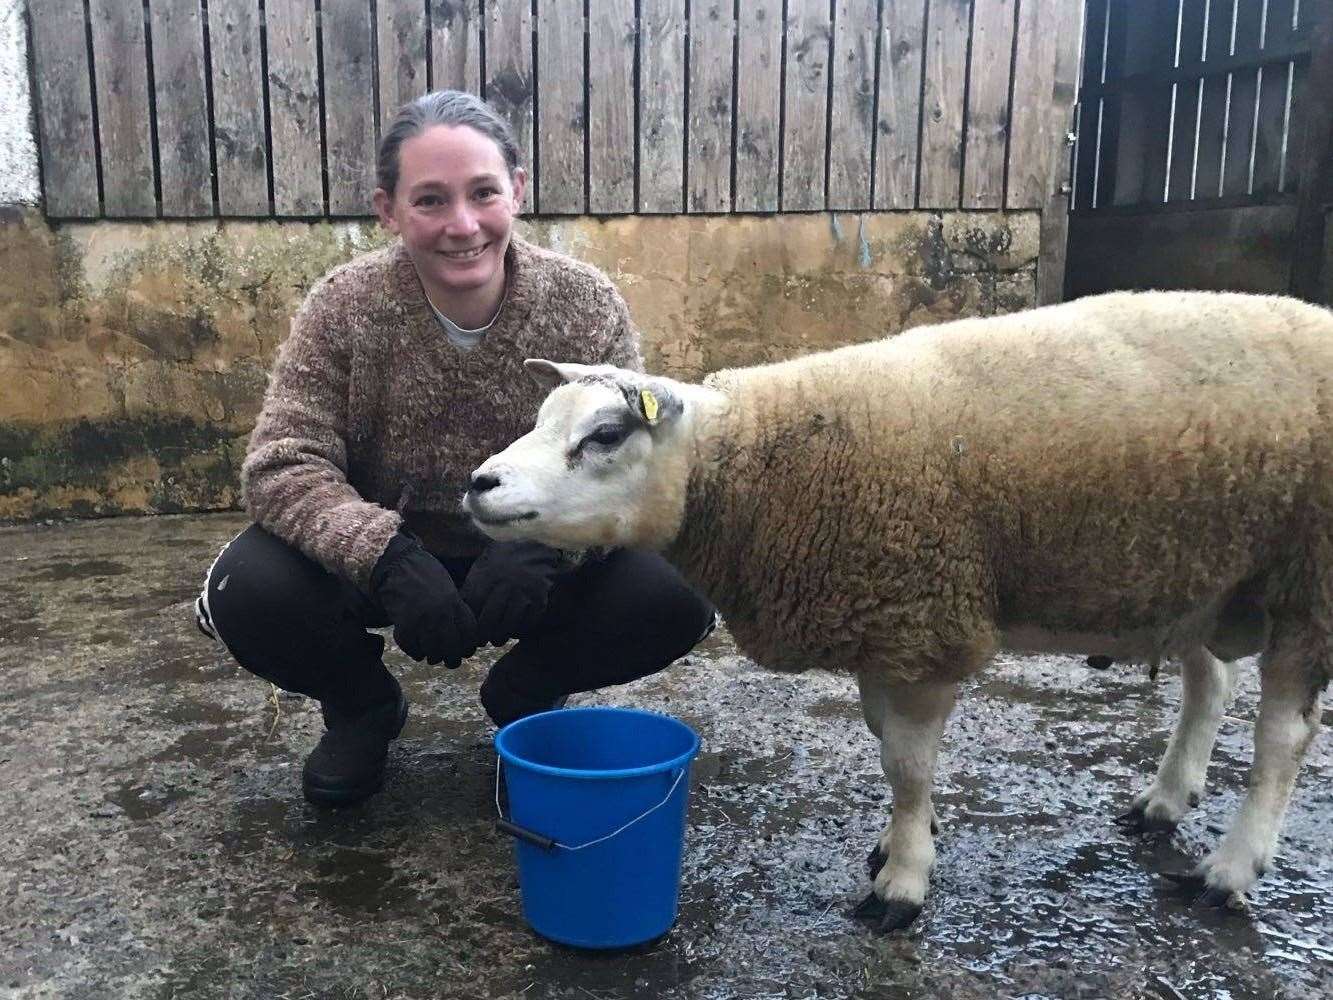 Elphin crofter Helen O'Keefe is a previous winner of the Young Crofter Award.